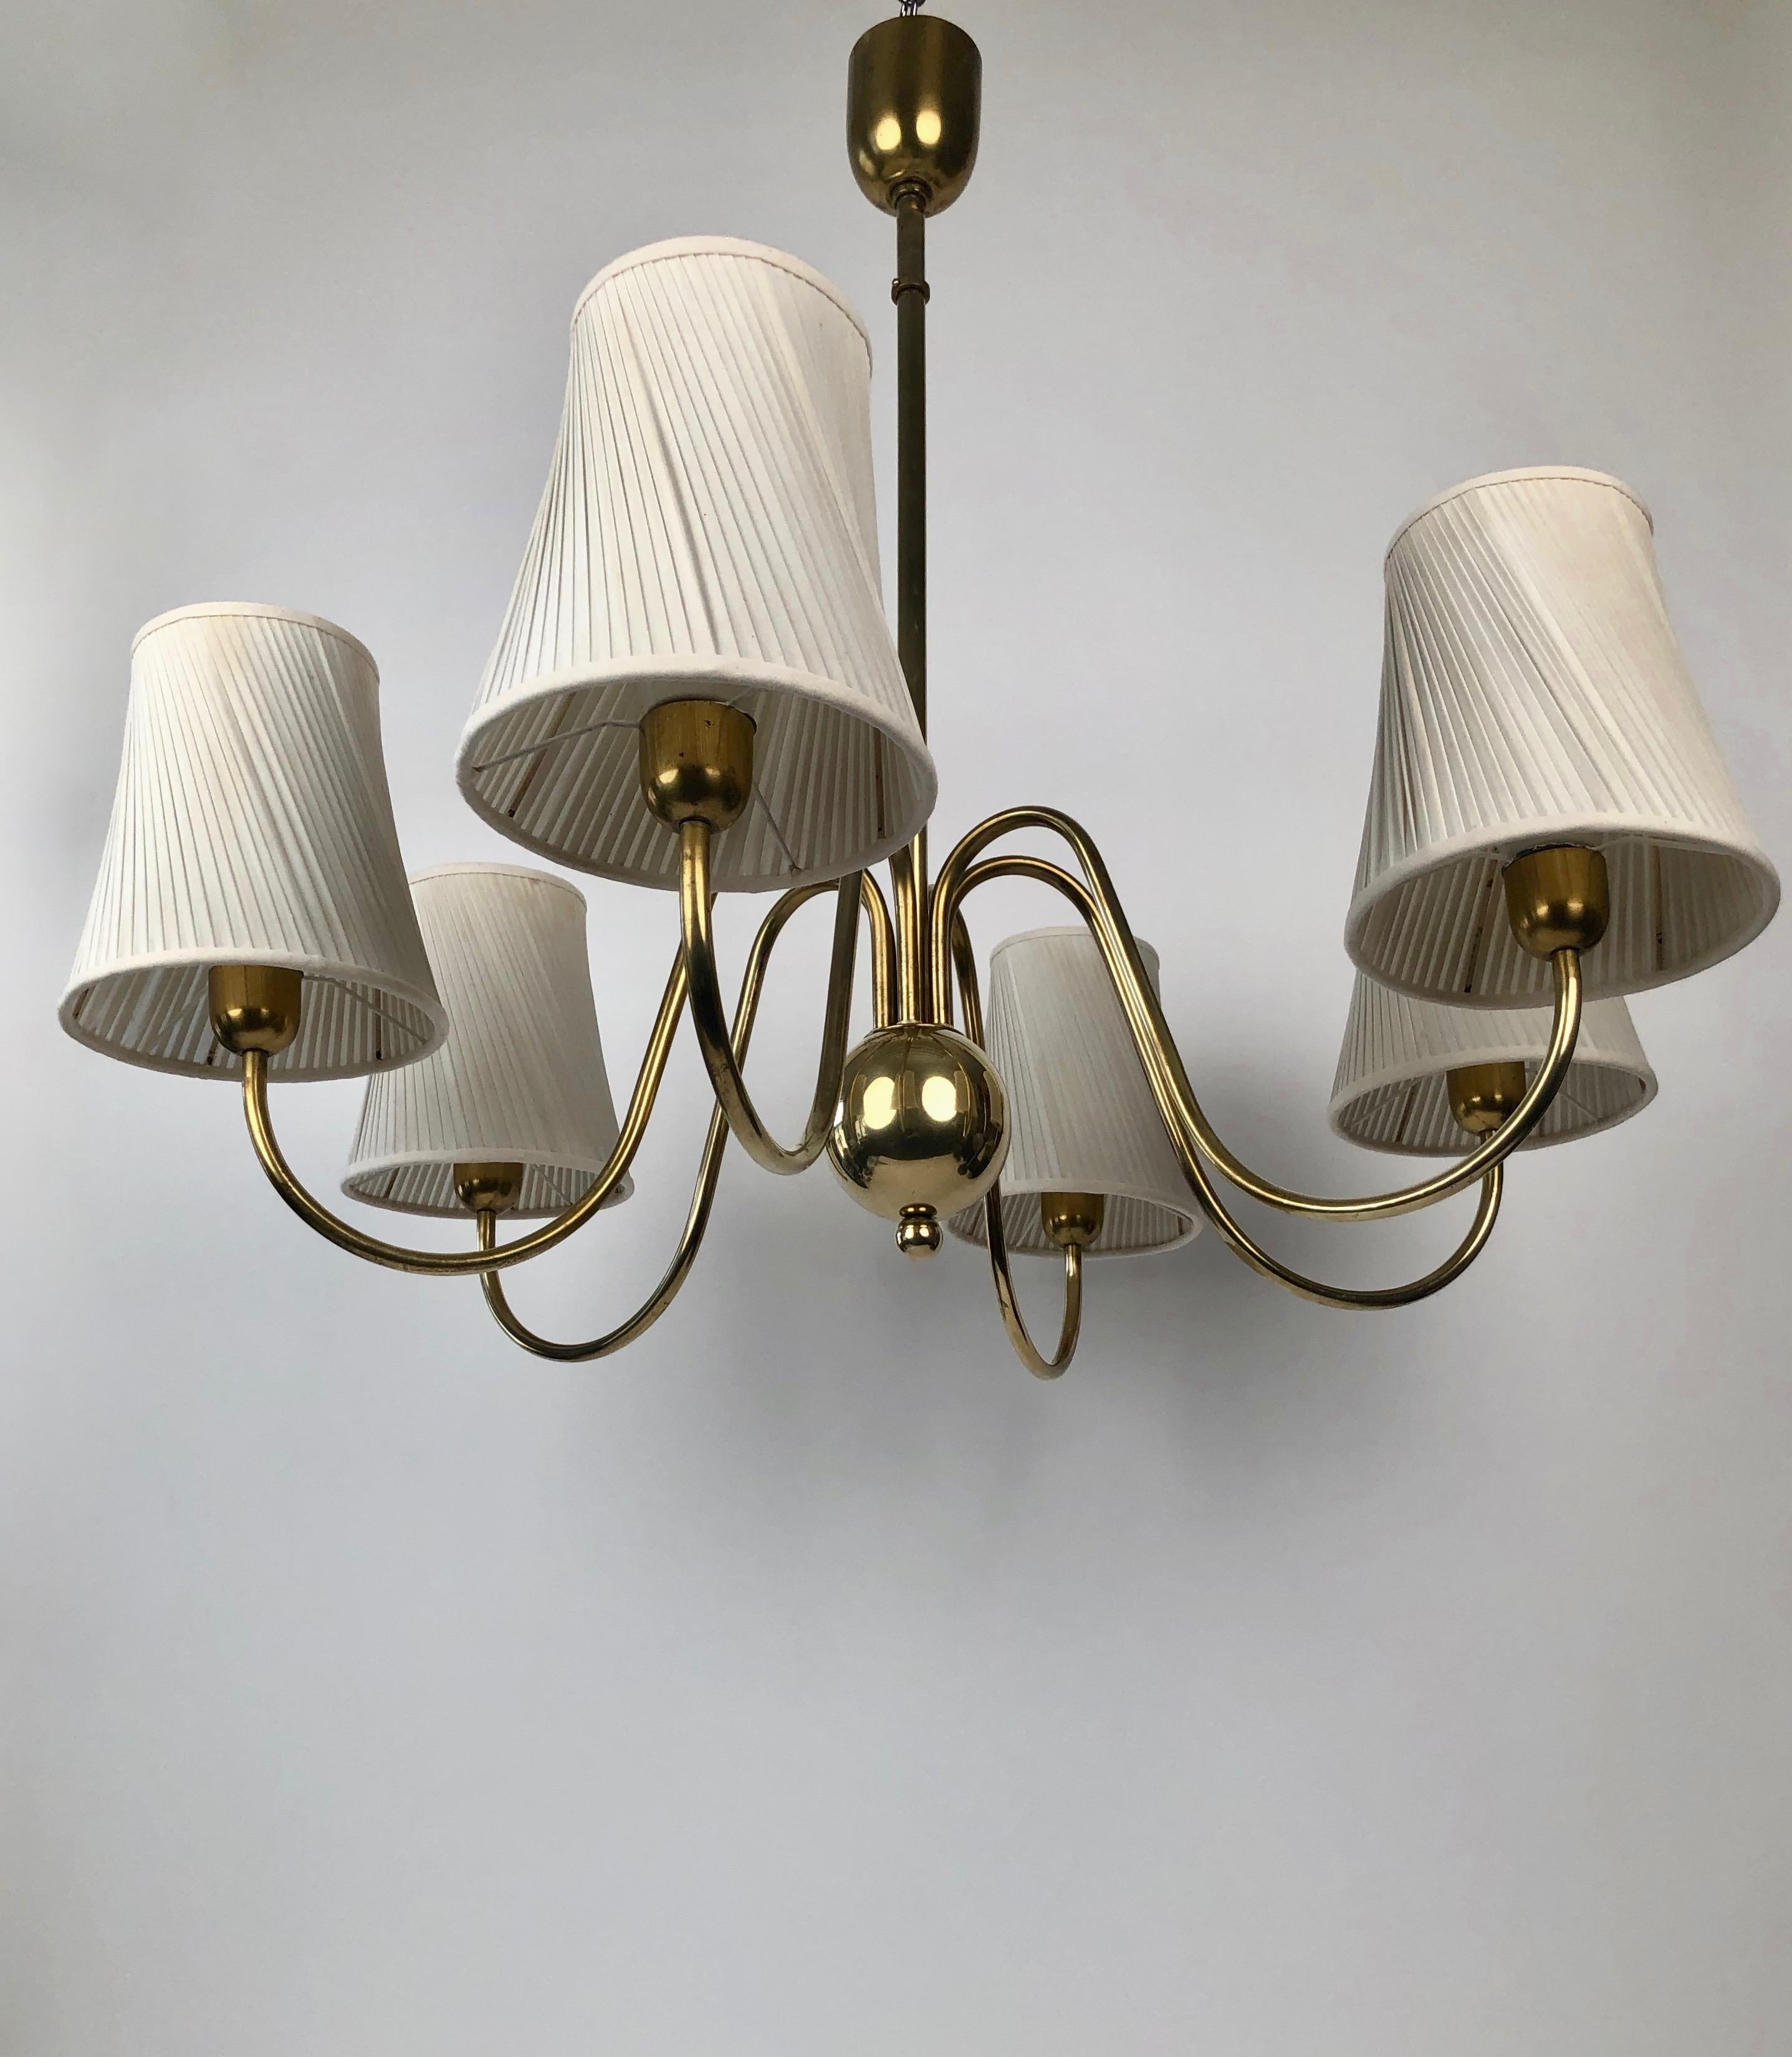 Six arm chandelier from Josef Frank from the 1930's. The shades are original with new pose met . The electric has been controlled. There is a patina on the still and canopy.
The canopy is slightly creased but dose not affect its use or aesthetic .